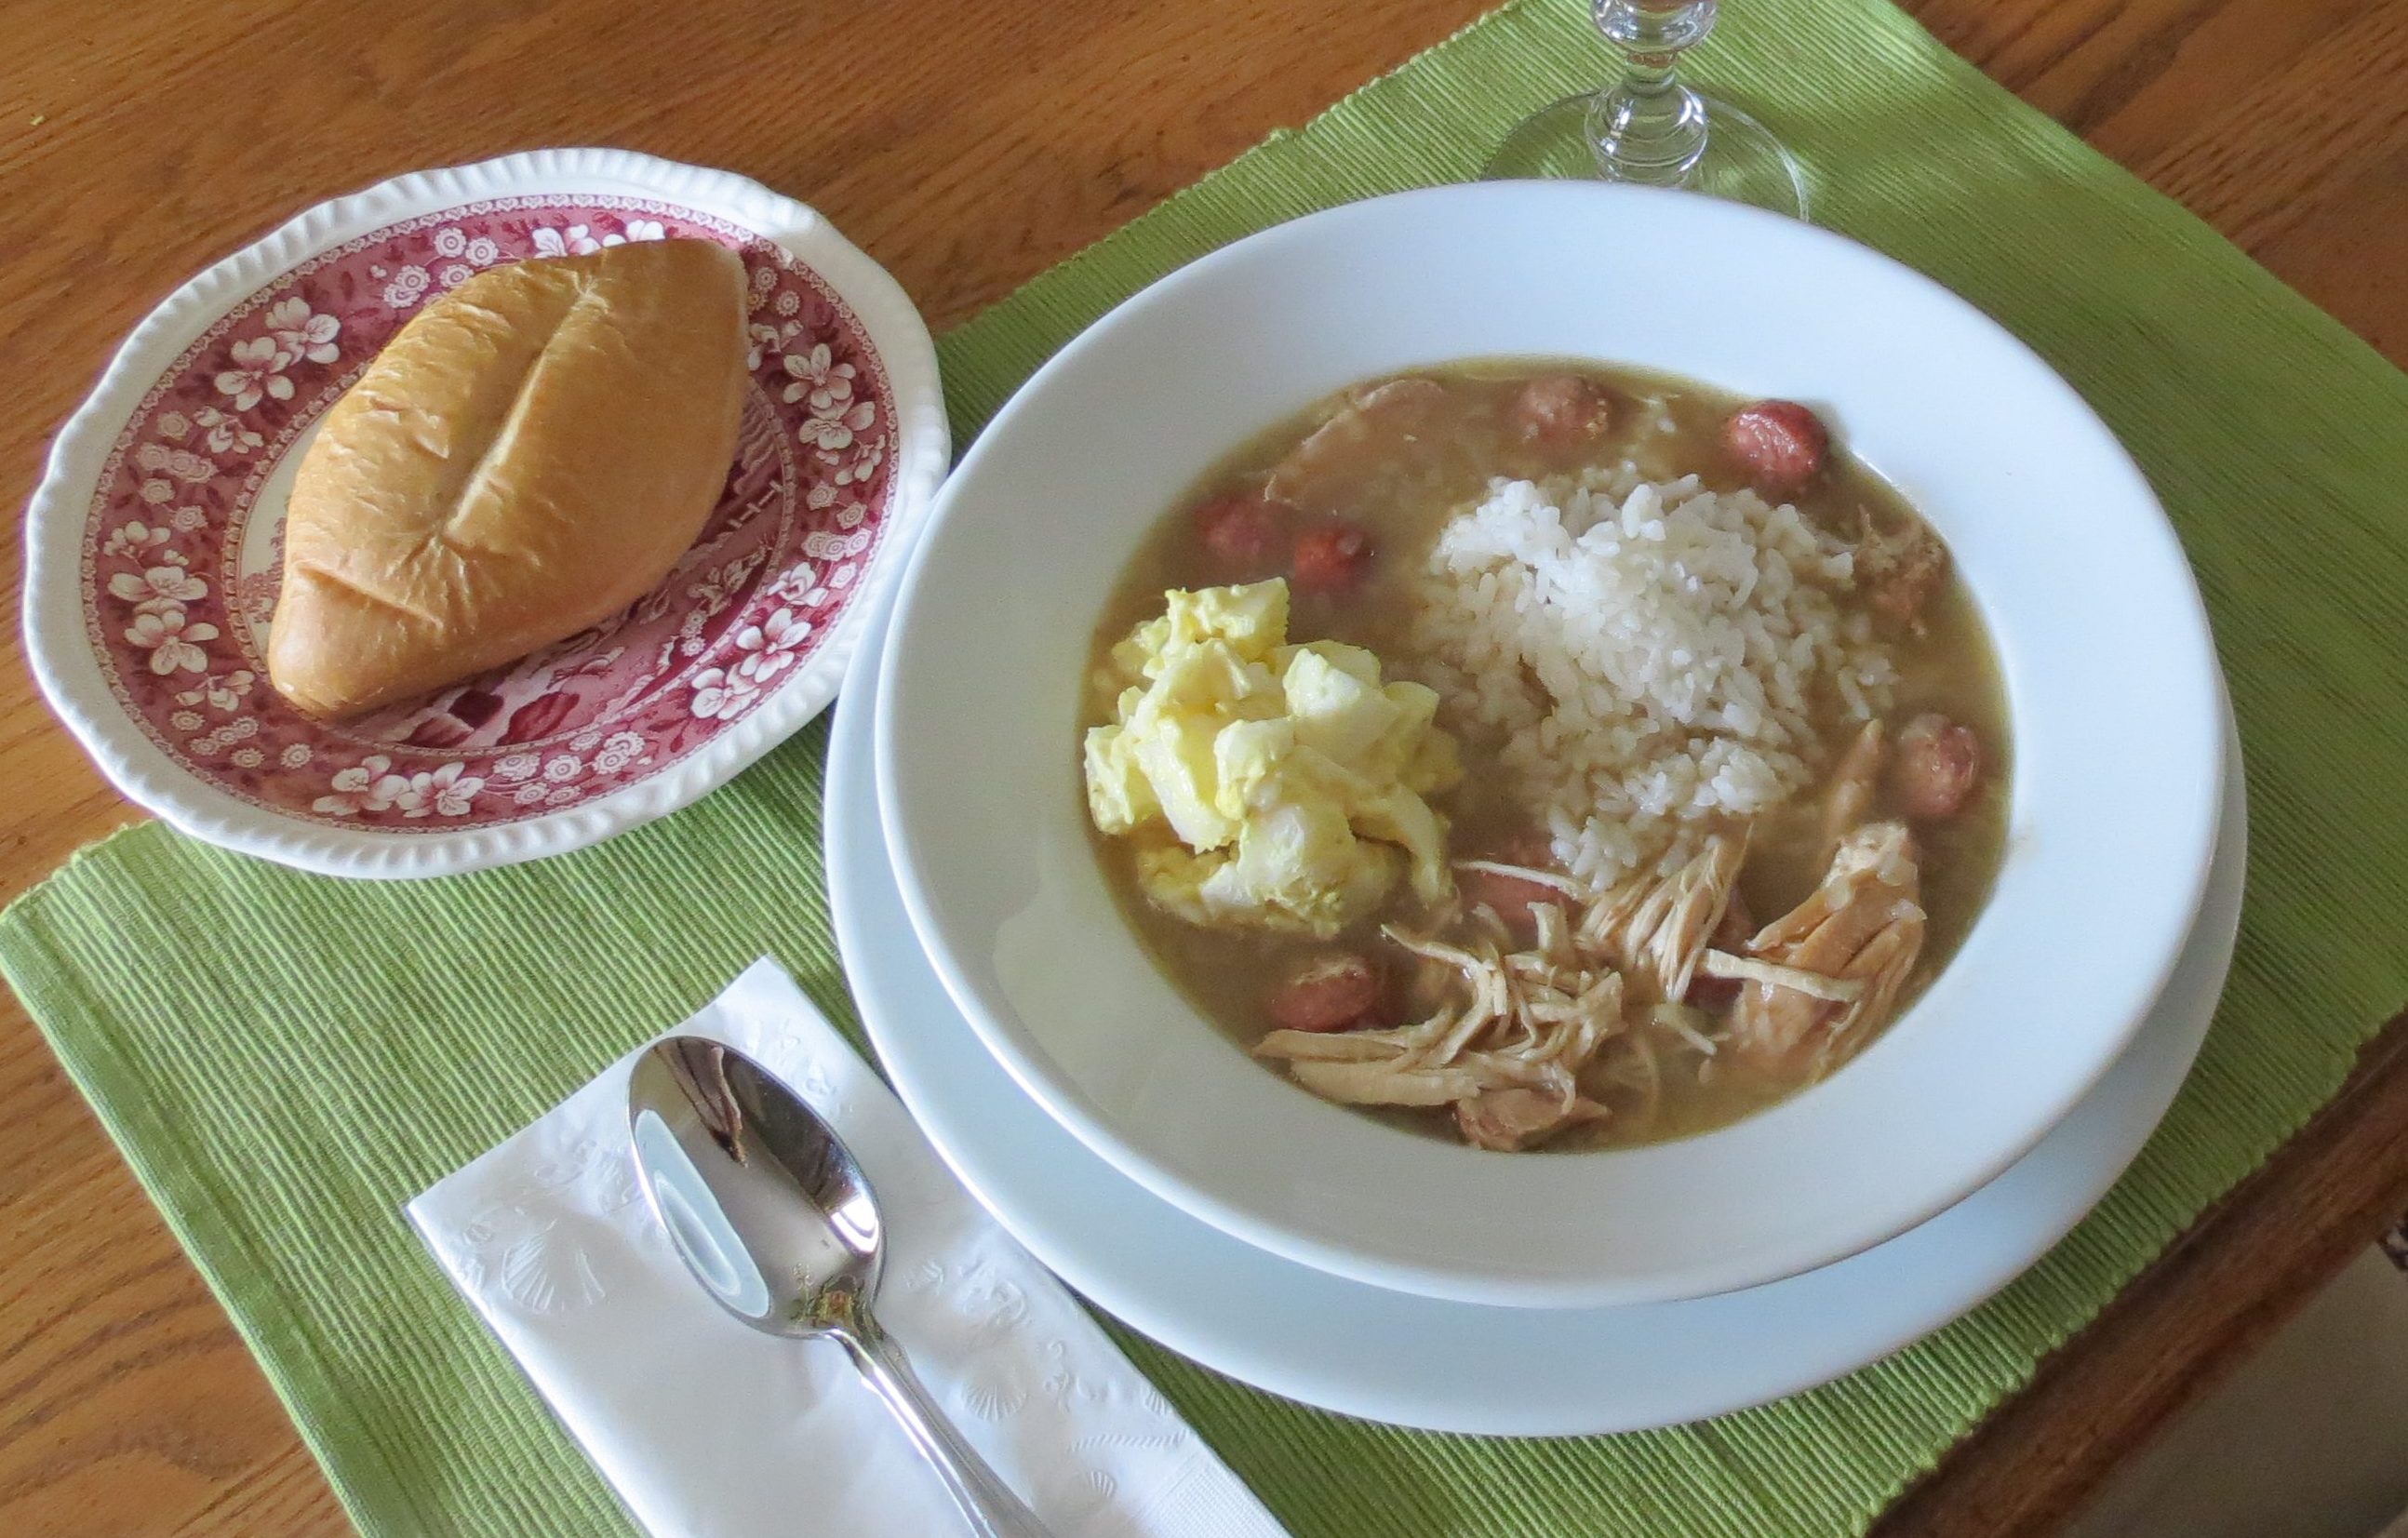 A white bowl of gumbo on a green place mat with a roll on a red and white plate.